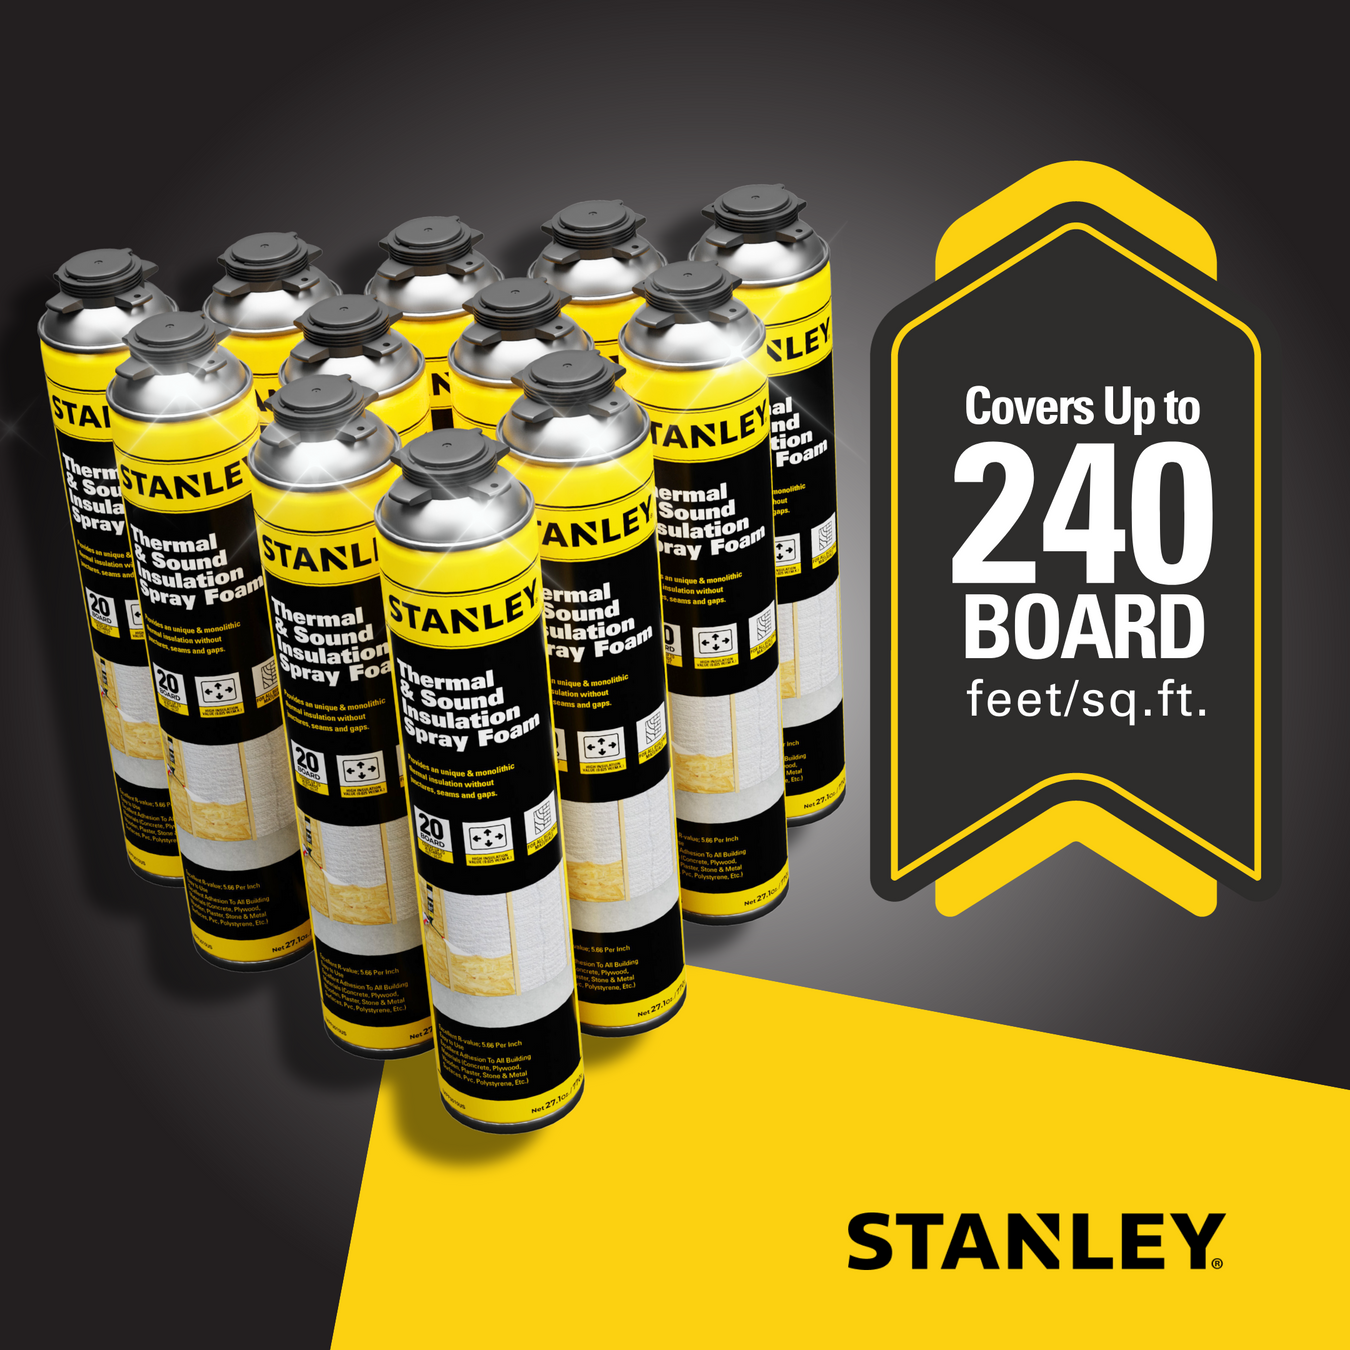 Stanley Supercoat Thermal & Sound Spray Foam Insulation Features 5